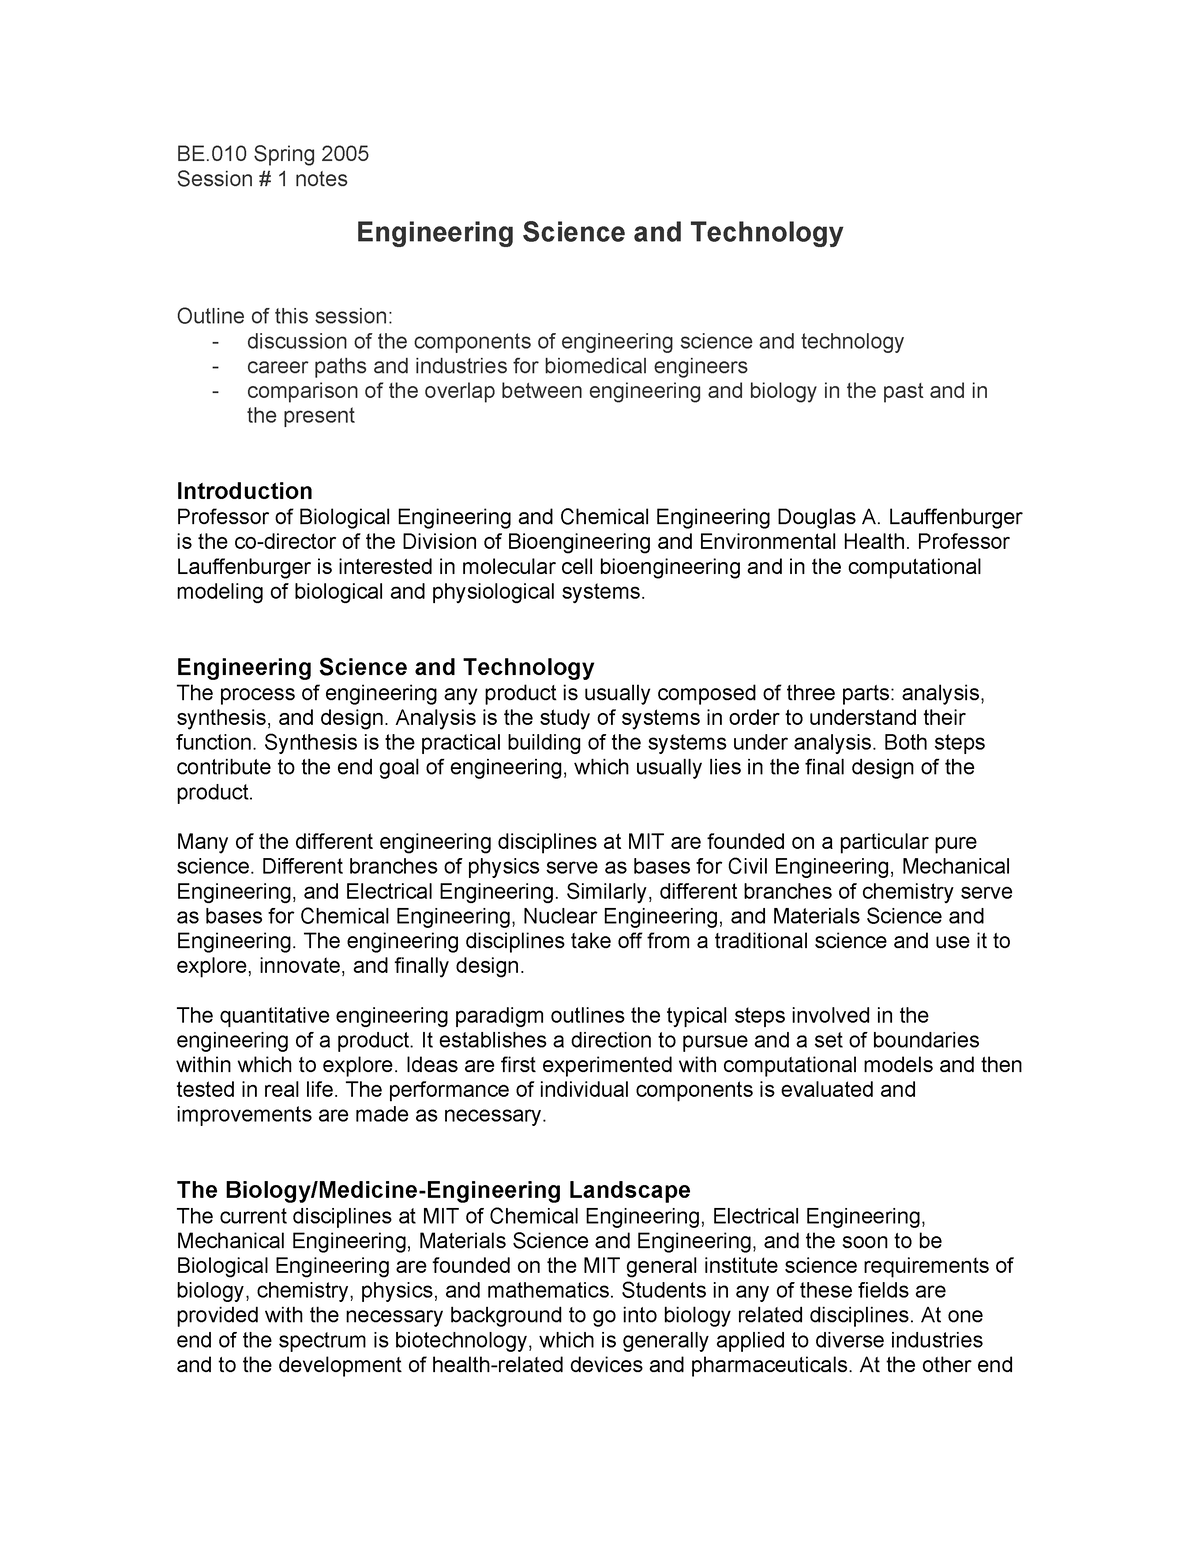 Bioengineering Science Lecture Notes - BE Spring 2005 Session # 1 notes ...